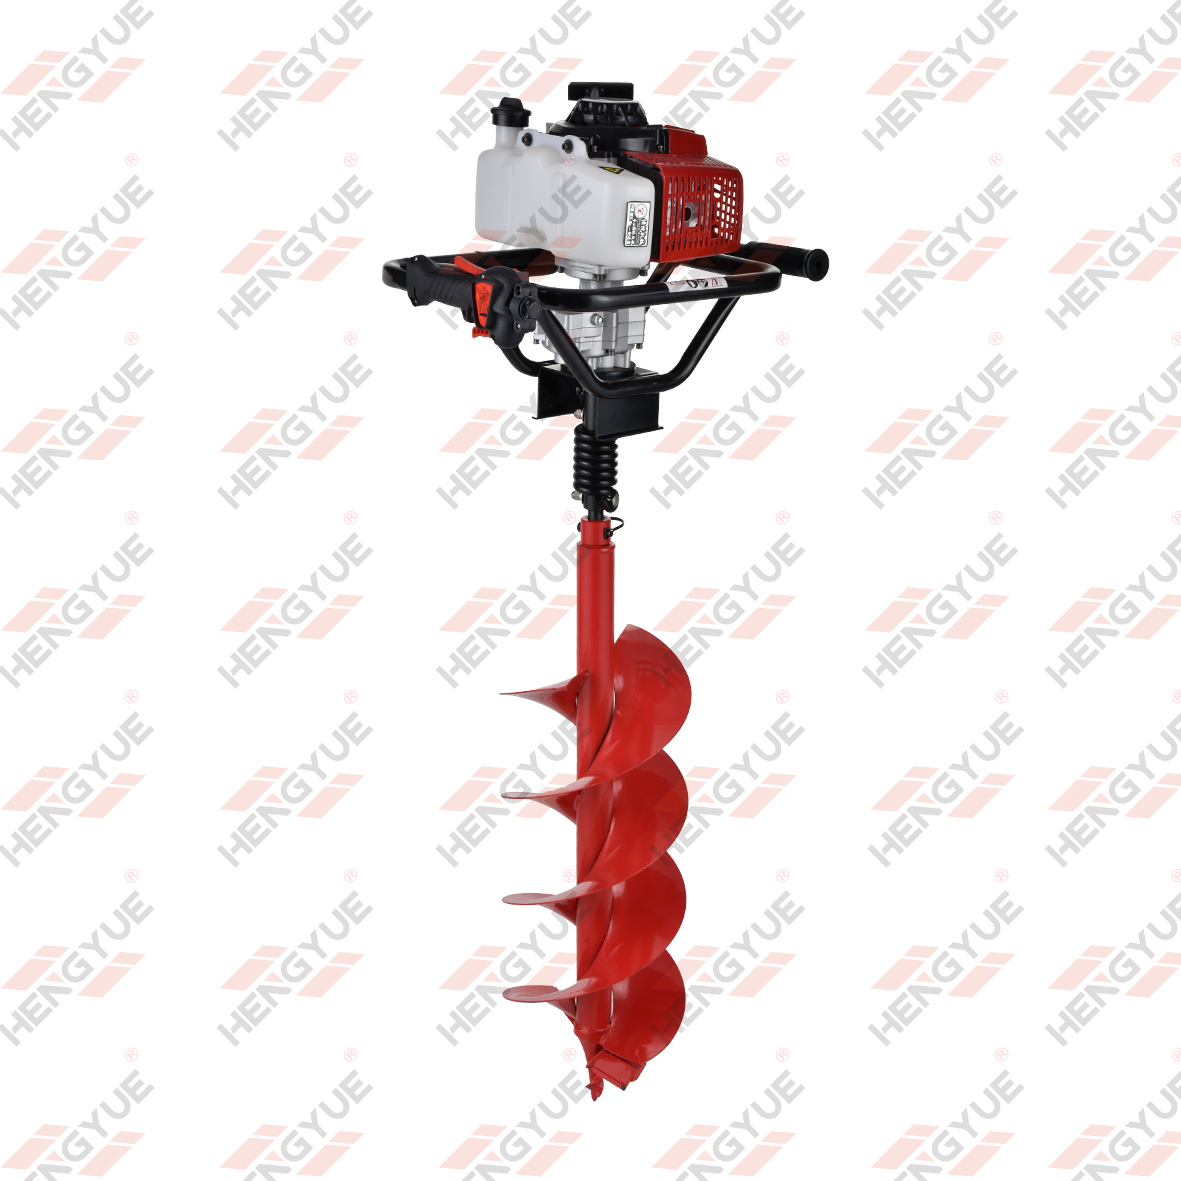 63/68CC Hand Held Earth Auger Machine